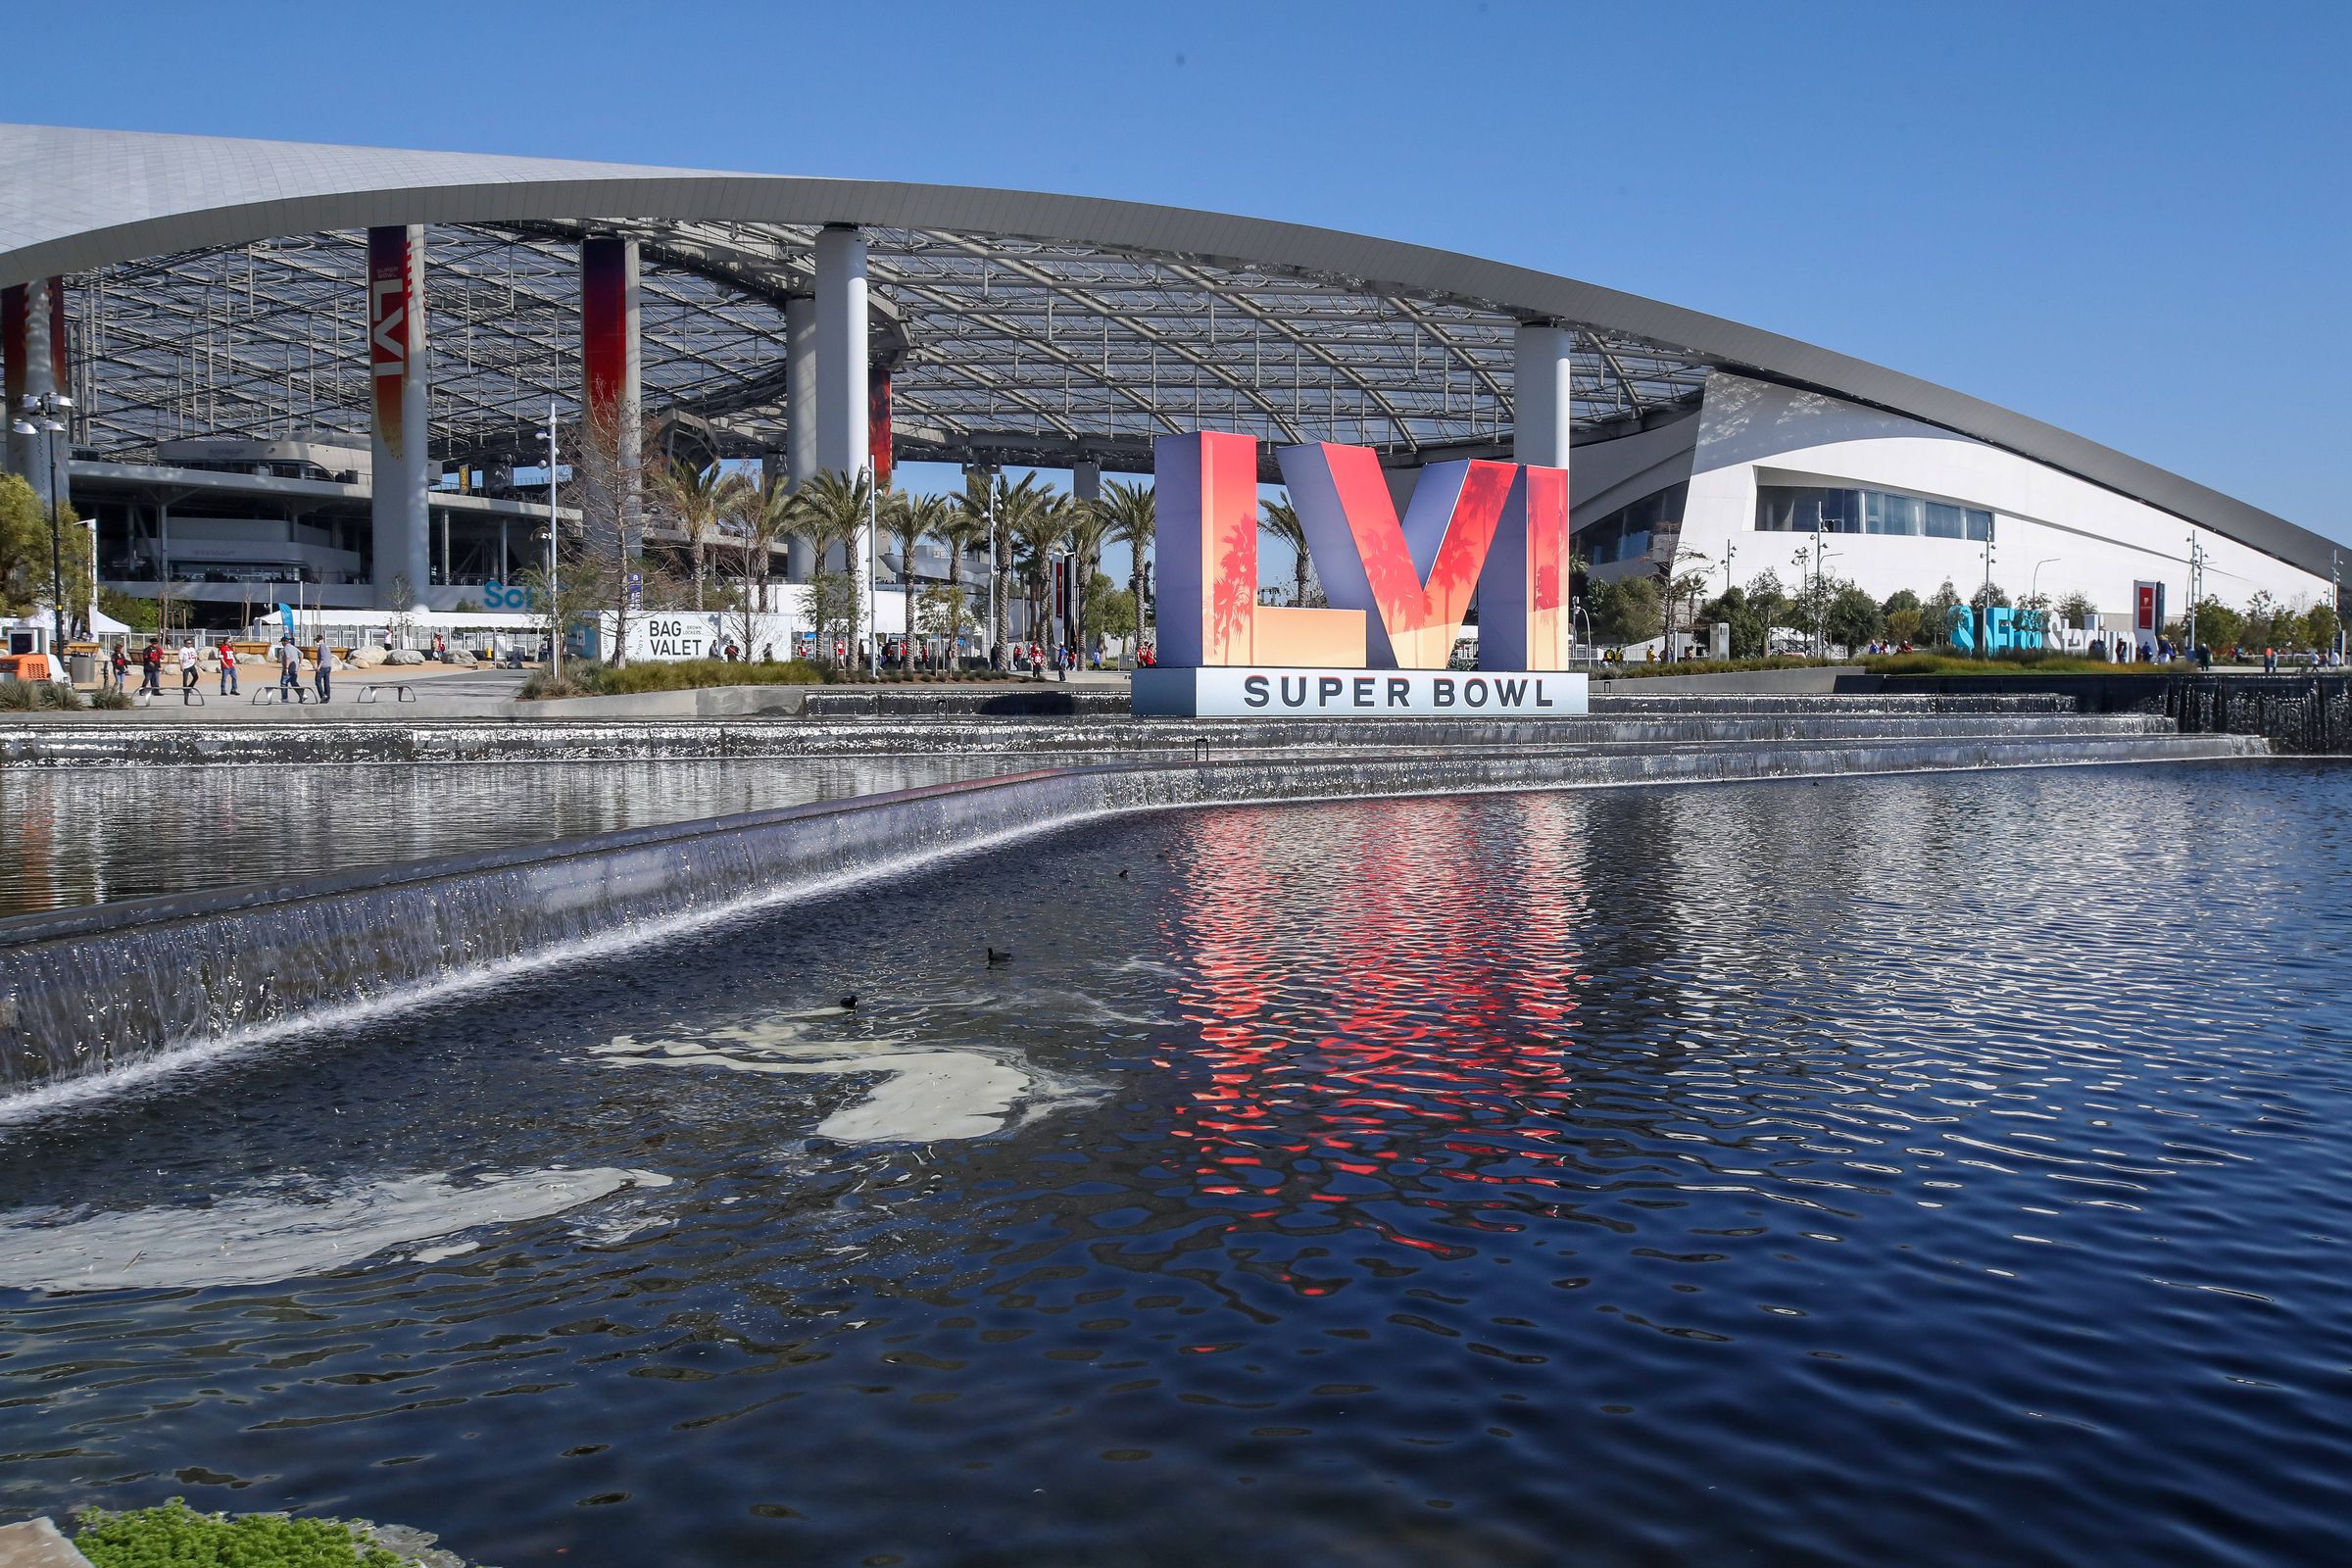 An outside shot of SoFi Stadium in Los Angeles ahead of Super Bowl LVI, featuring the logo for the Super Bowl spelled out in roman numerals.